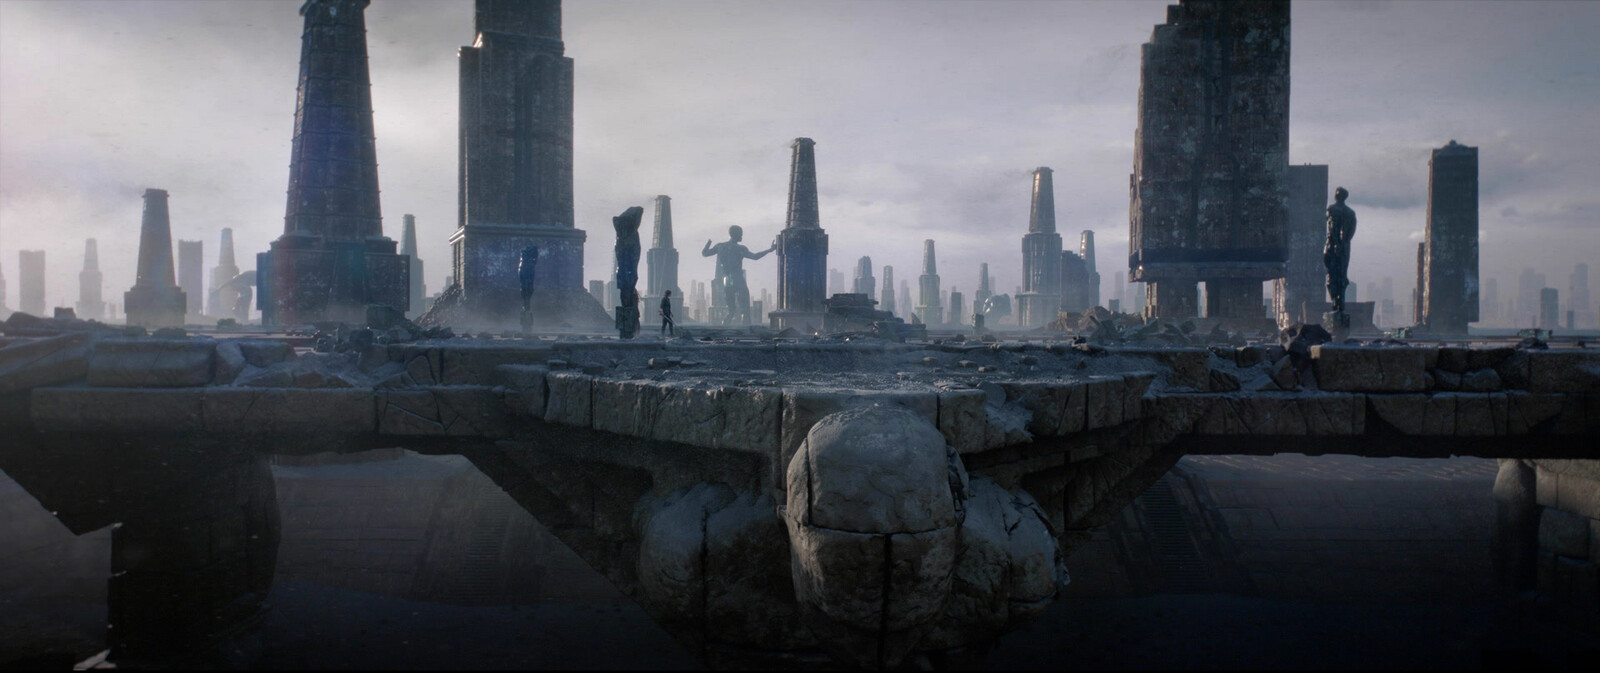 The final city created by Industrial, Light &amp; Magic as seen in the series